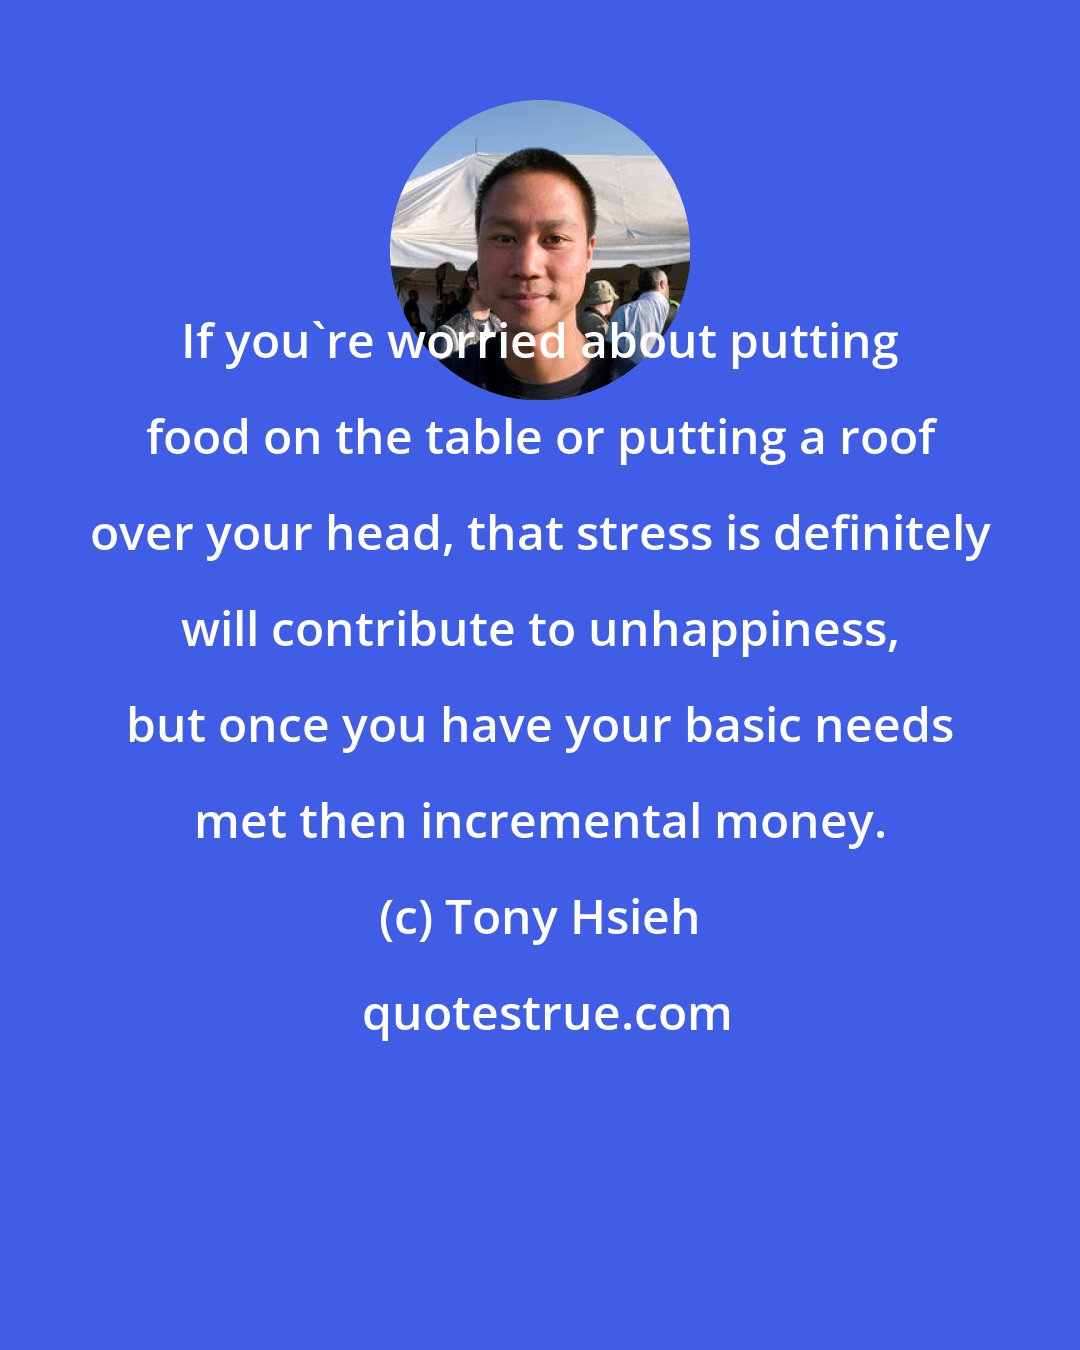 Tony Hsieh: If you're worried about putting food on the table or putting a roof over your head, that stress is definitely will contribute to unhappiness, but once you have your basic needs met then incremental money.